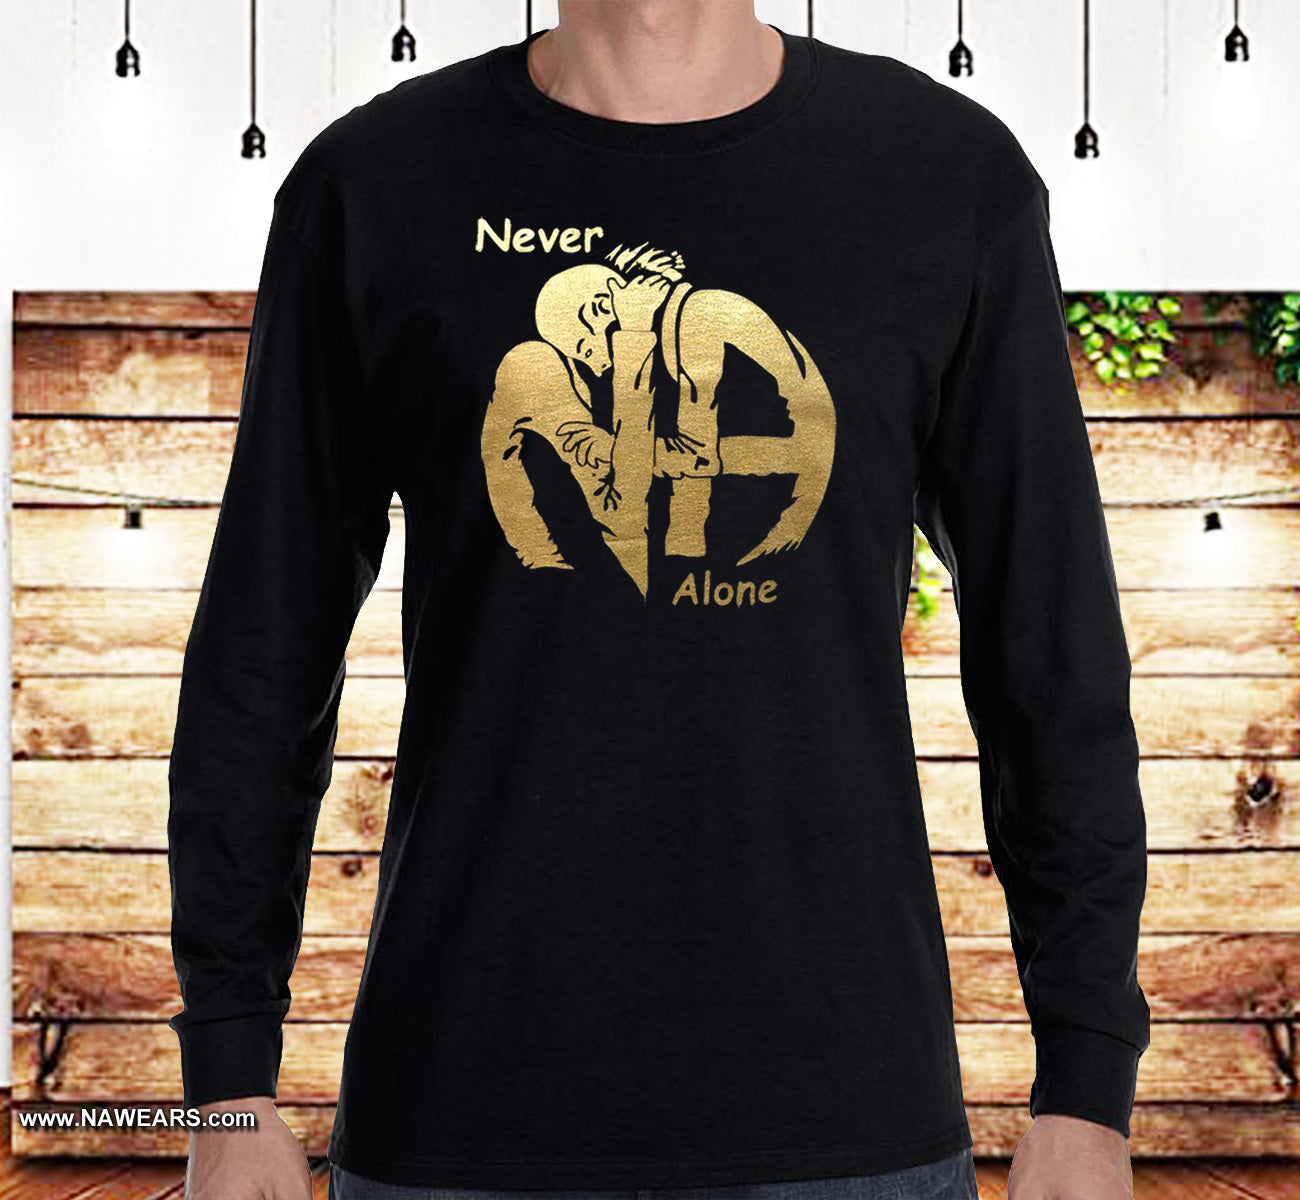 NA Shirts, Narcotics Anonymous Shirt, HUGS / THE GENTLE EMBRACE